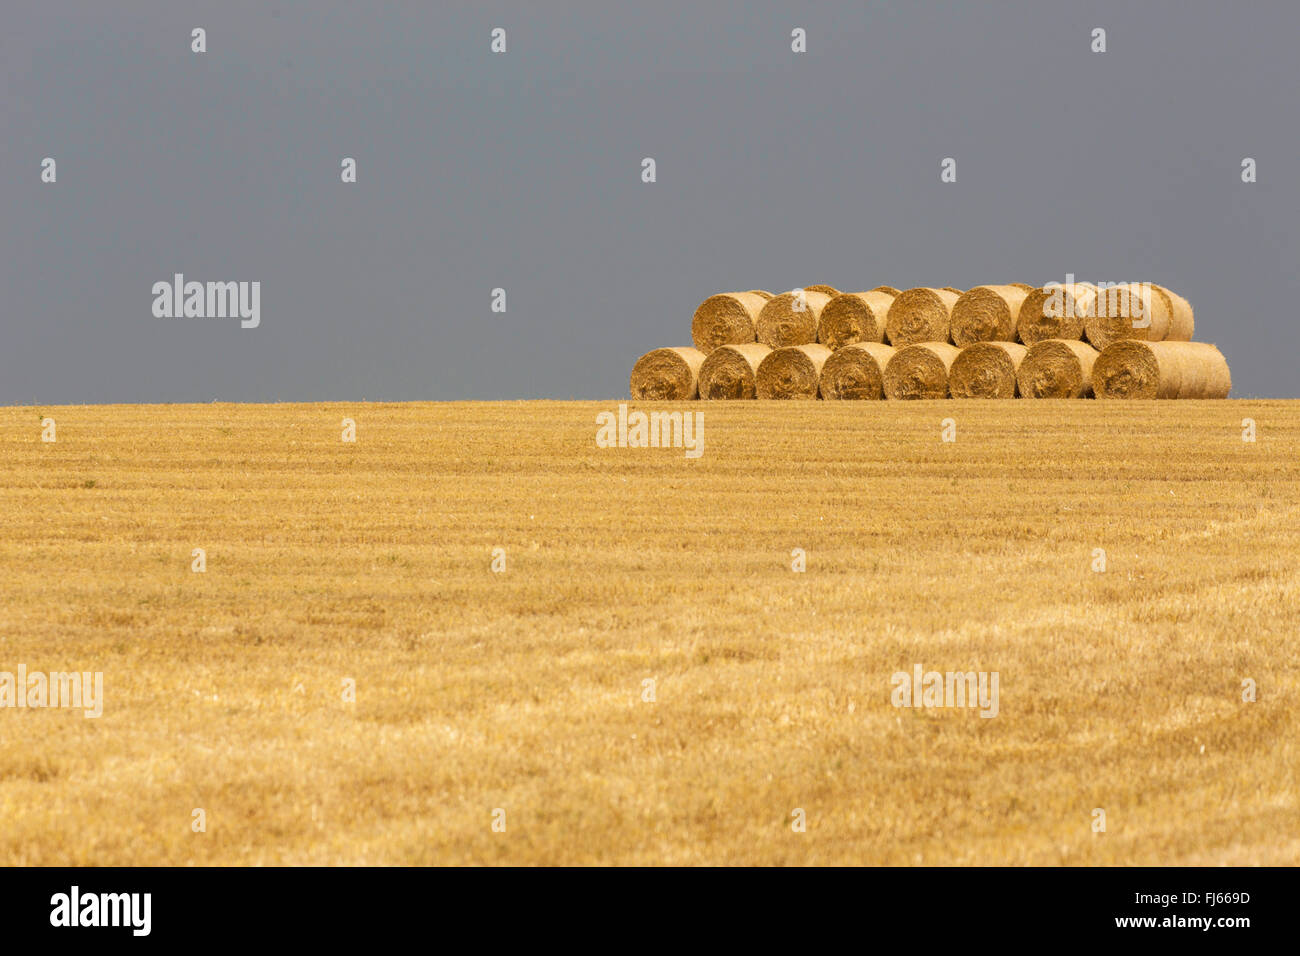 bread wheat, cultivated wheat (Triticum aestivum), harvested field with straw balls, Germany, Bavaria, Oberbayern, Upper Bavaria Stock Photo